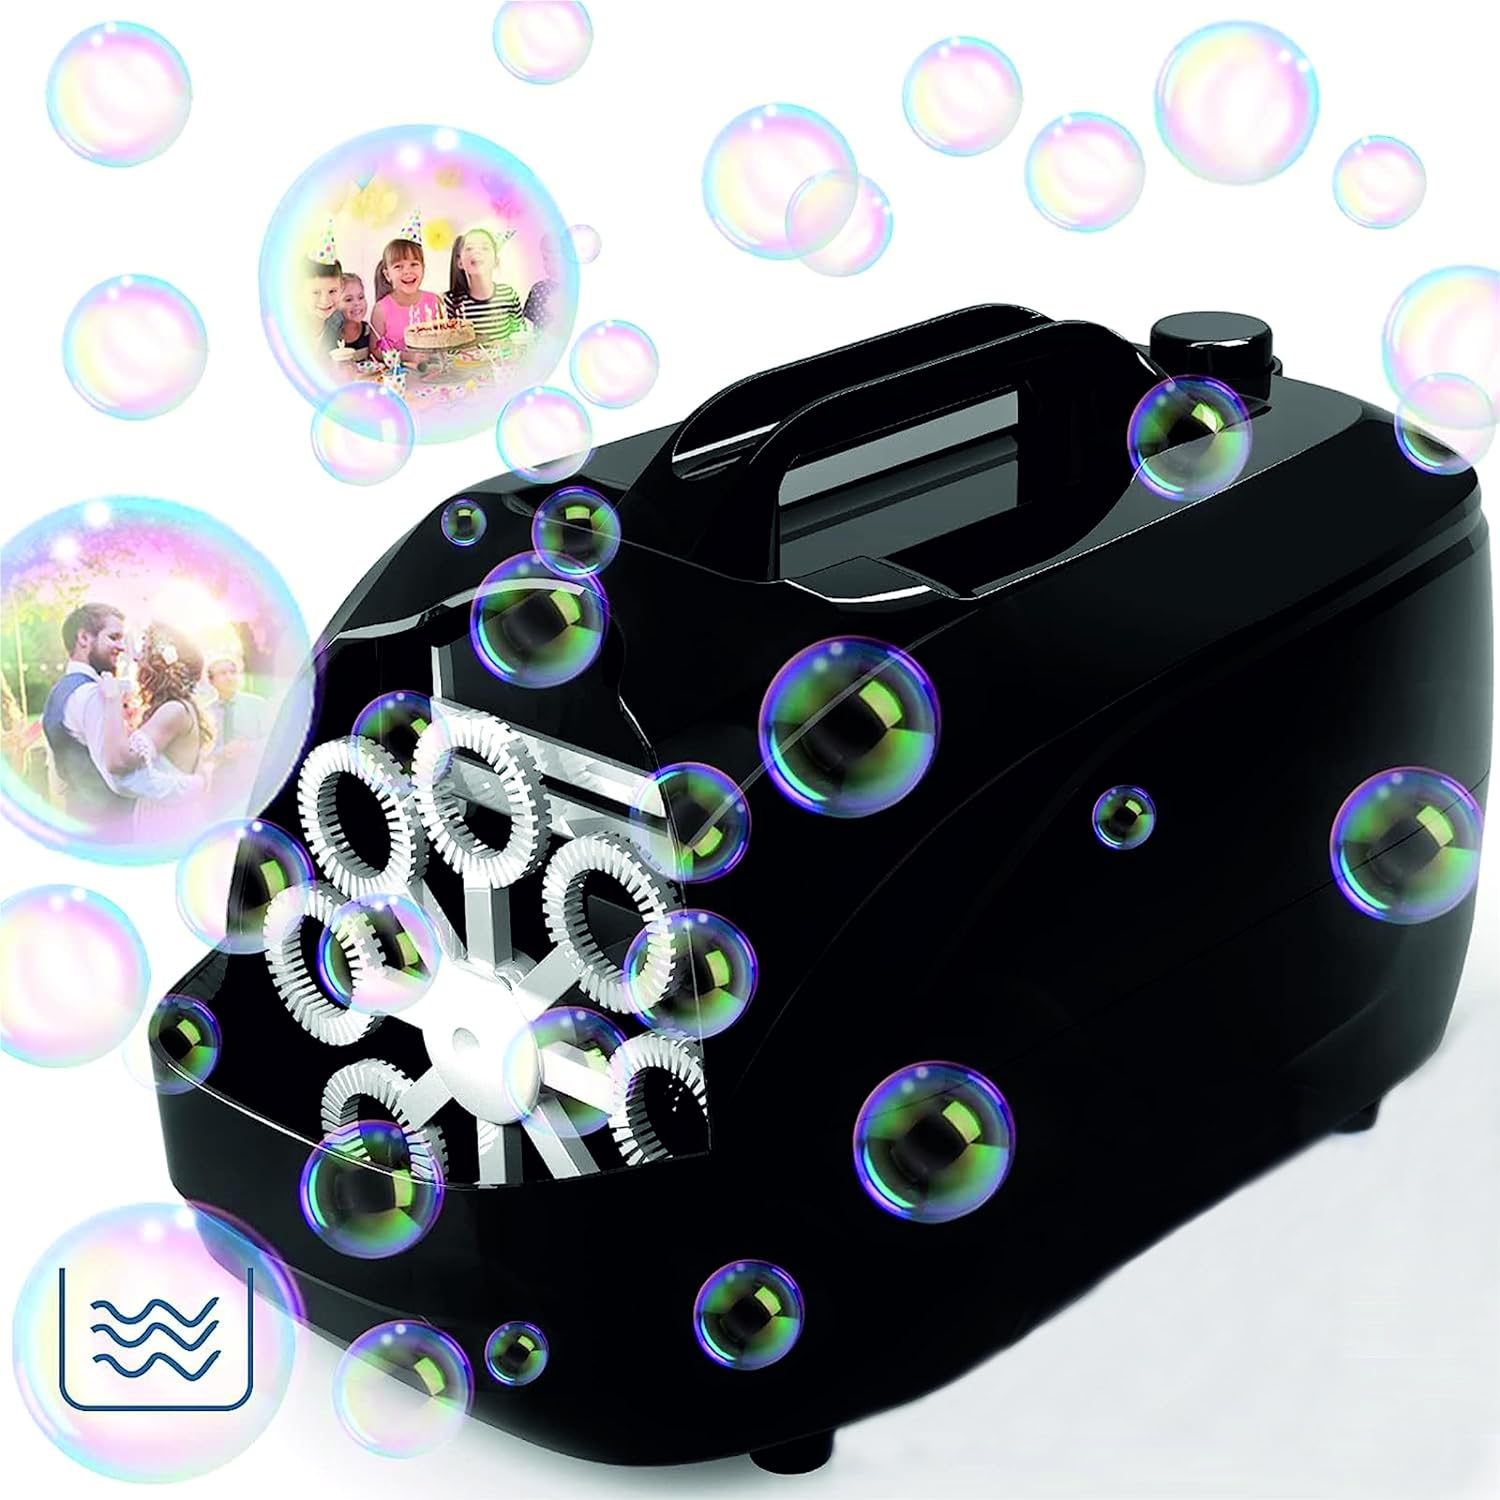 Braintastic Bubble Machine for Party Automatic Bubble Blower- 10000+ Bubbles Minute with 2 Speeds, Bubble Gun for Kids Adults, Plug-in or Batteries Bubbles Summer Toys for Outdoor Indoor Party Birthday